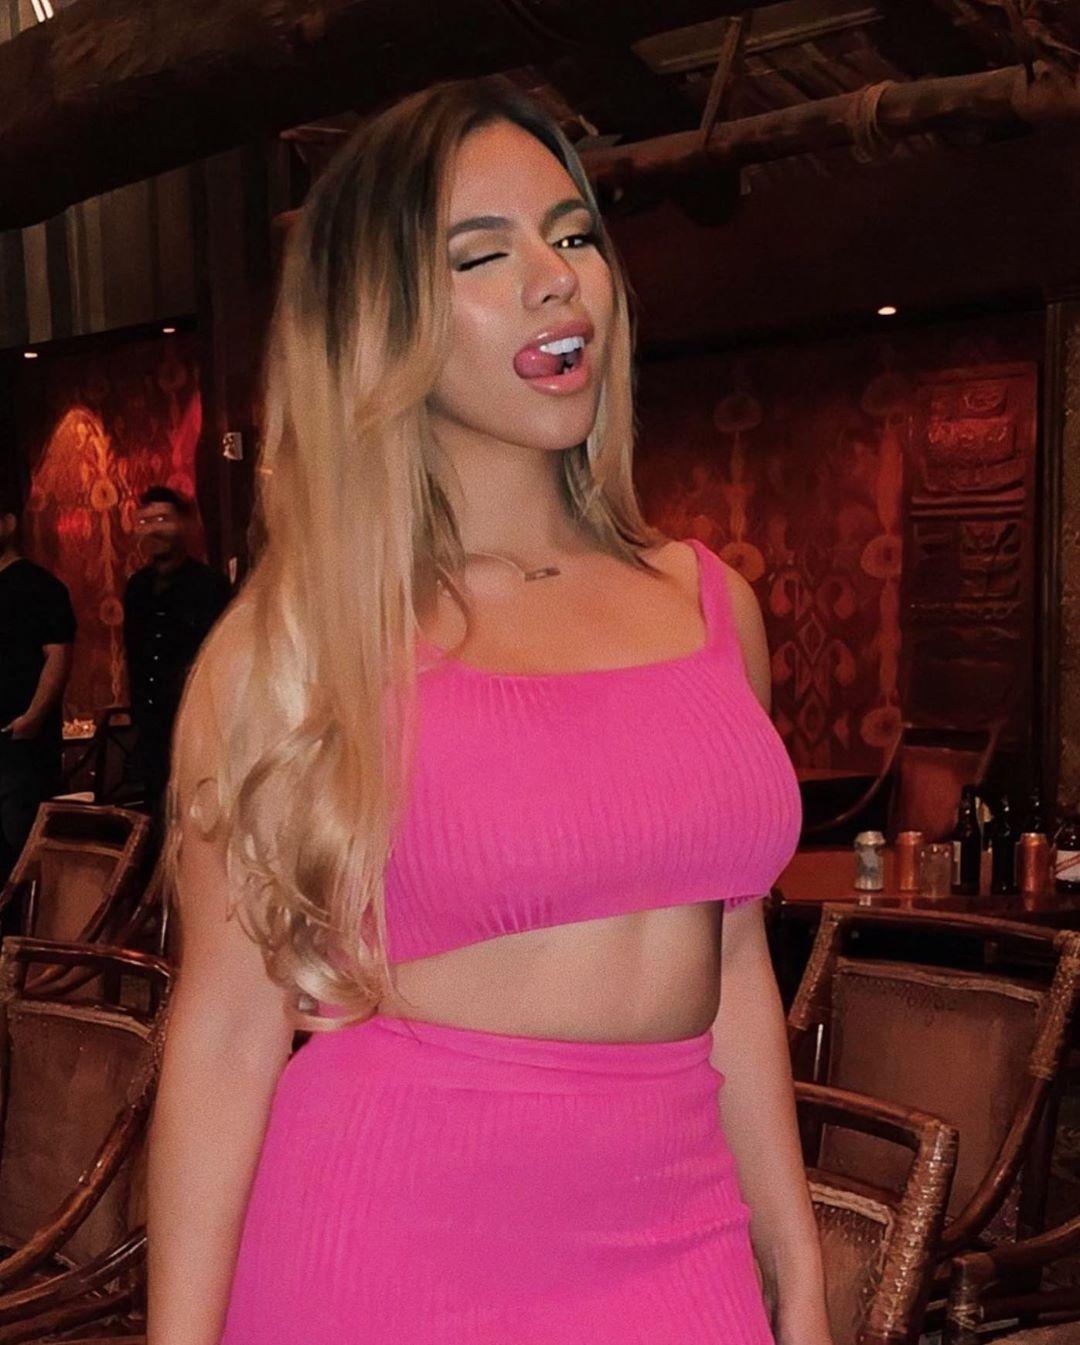 51 Hot Pictures Of Dinah Jane That Will Make Your Heart Pound For Her 15